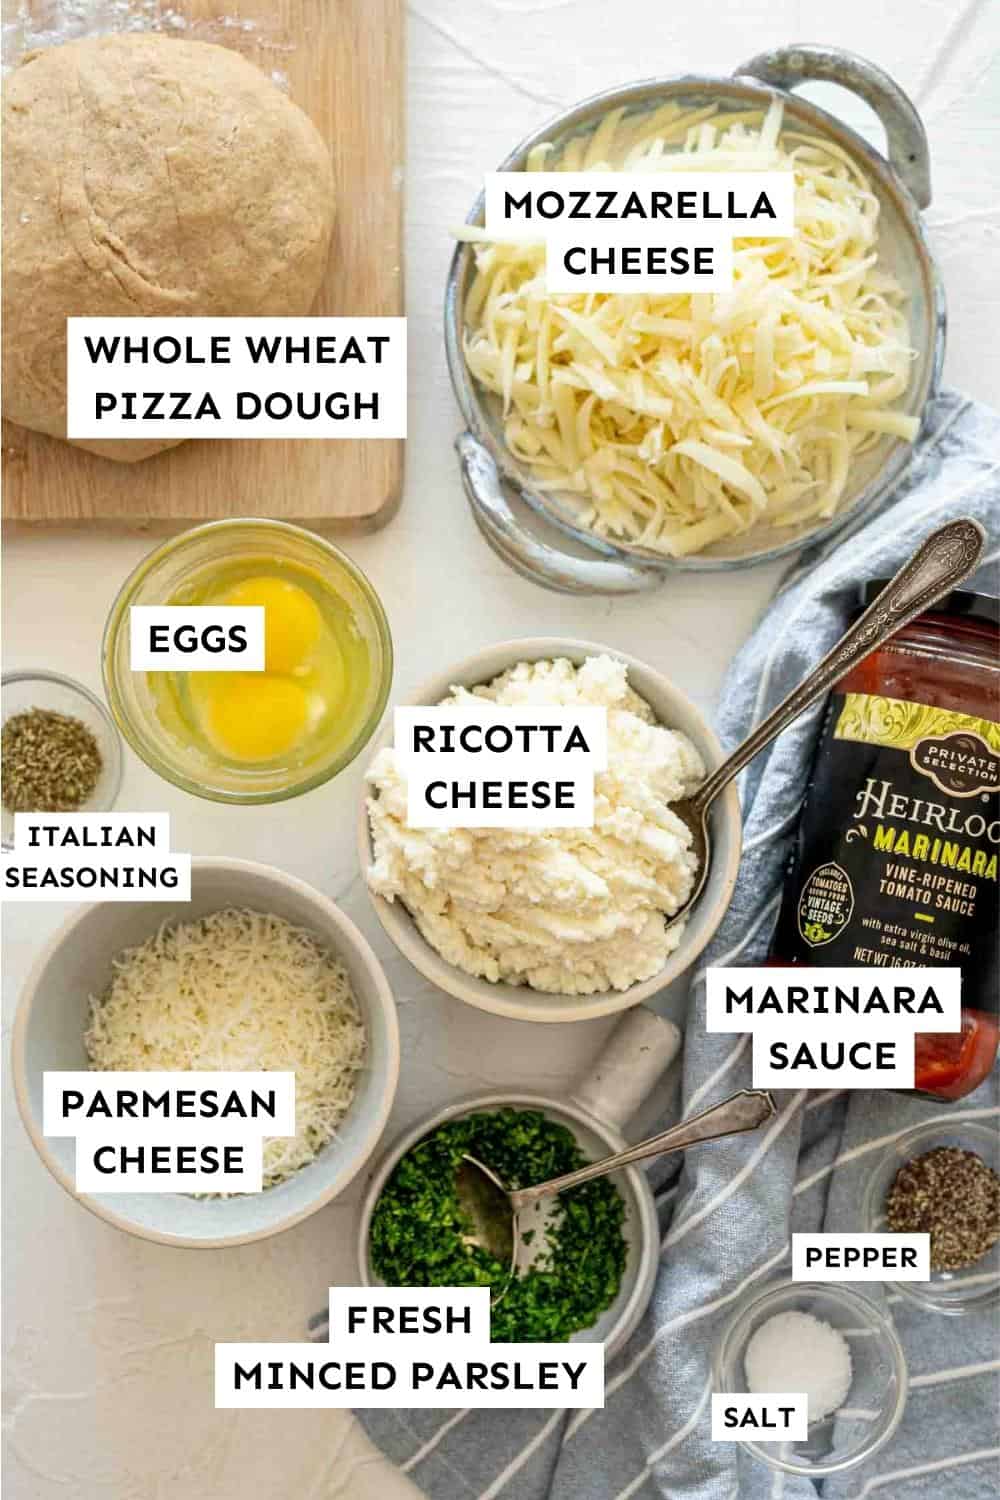 Ingredients pictured for Cheese Calzones